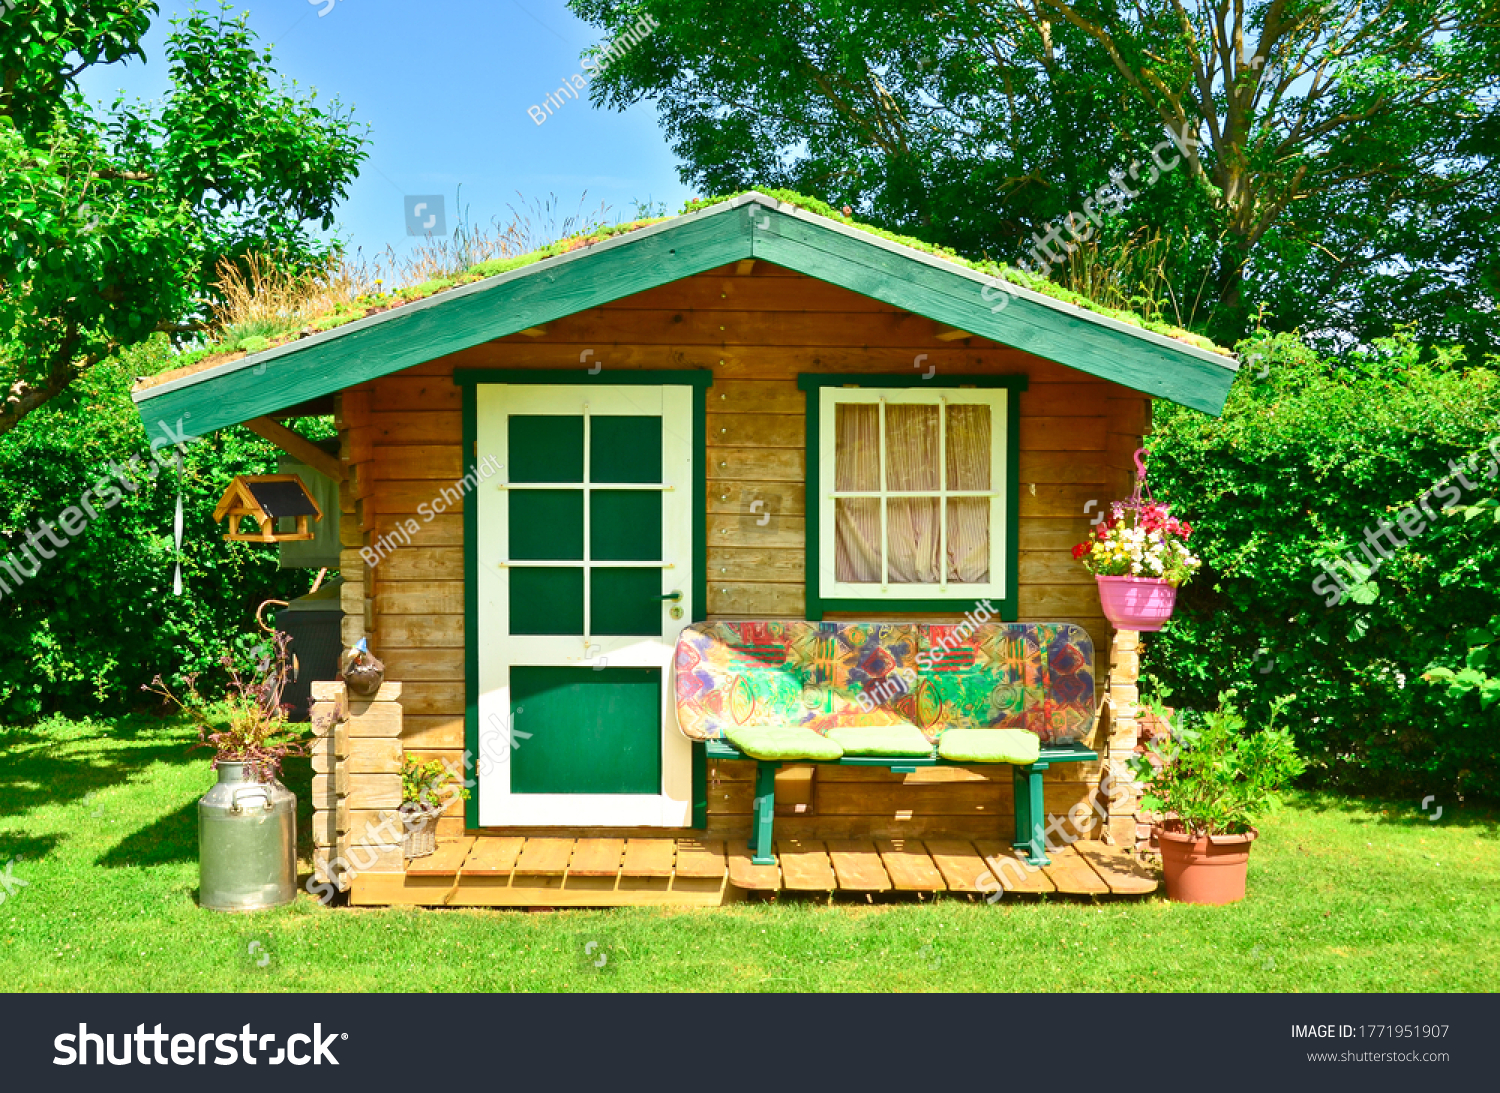 A light green and wooden small shed, gardenhouse, with a bench some tools around it #1771951907